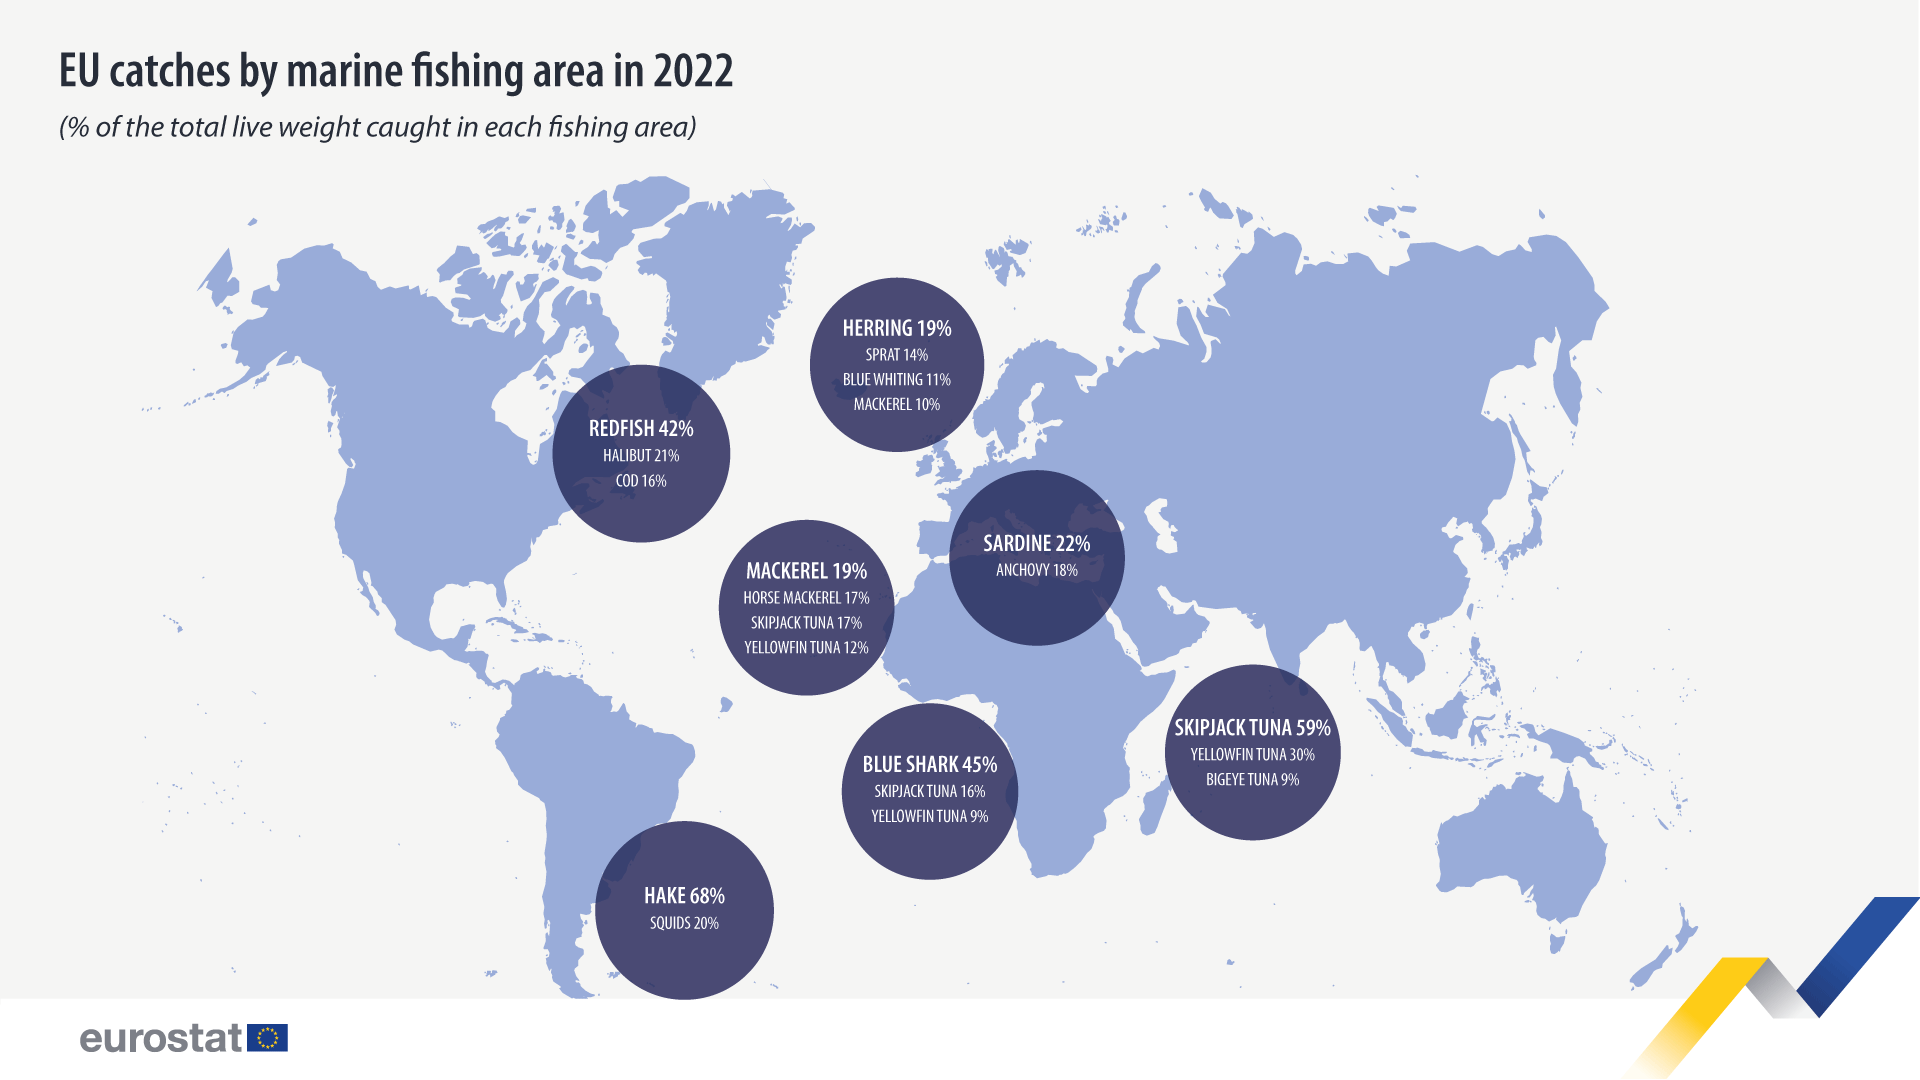 EU catches by marine fishing area in 2022, % of total live weight in each area